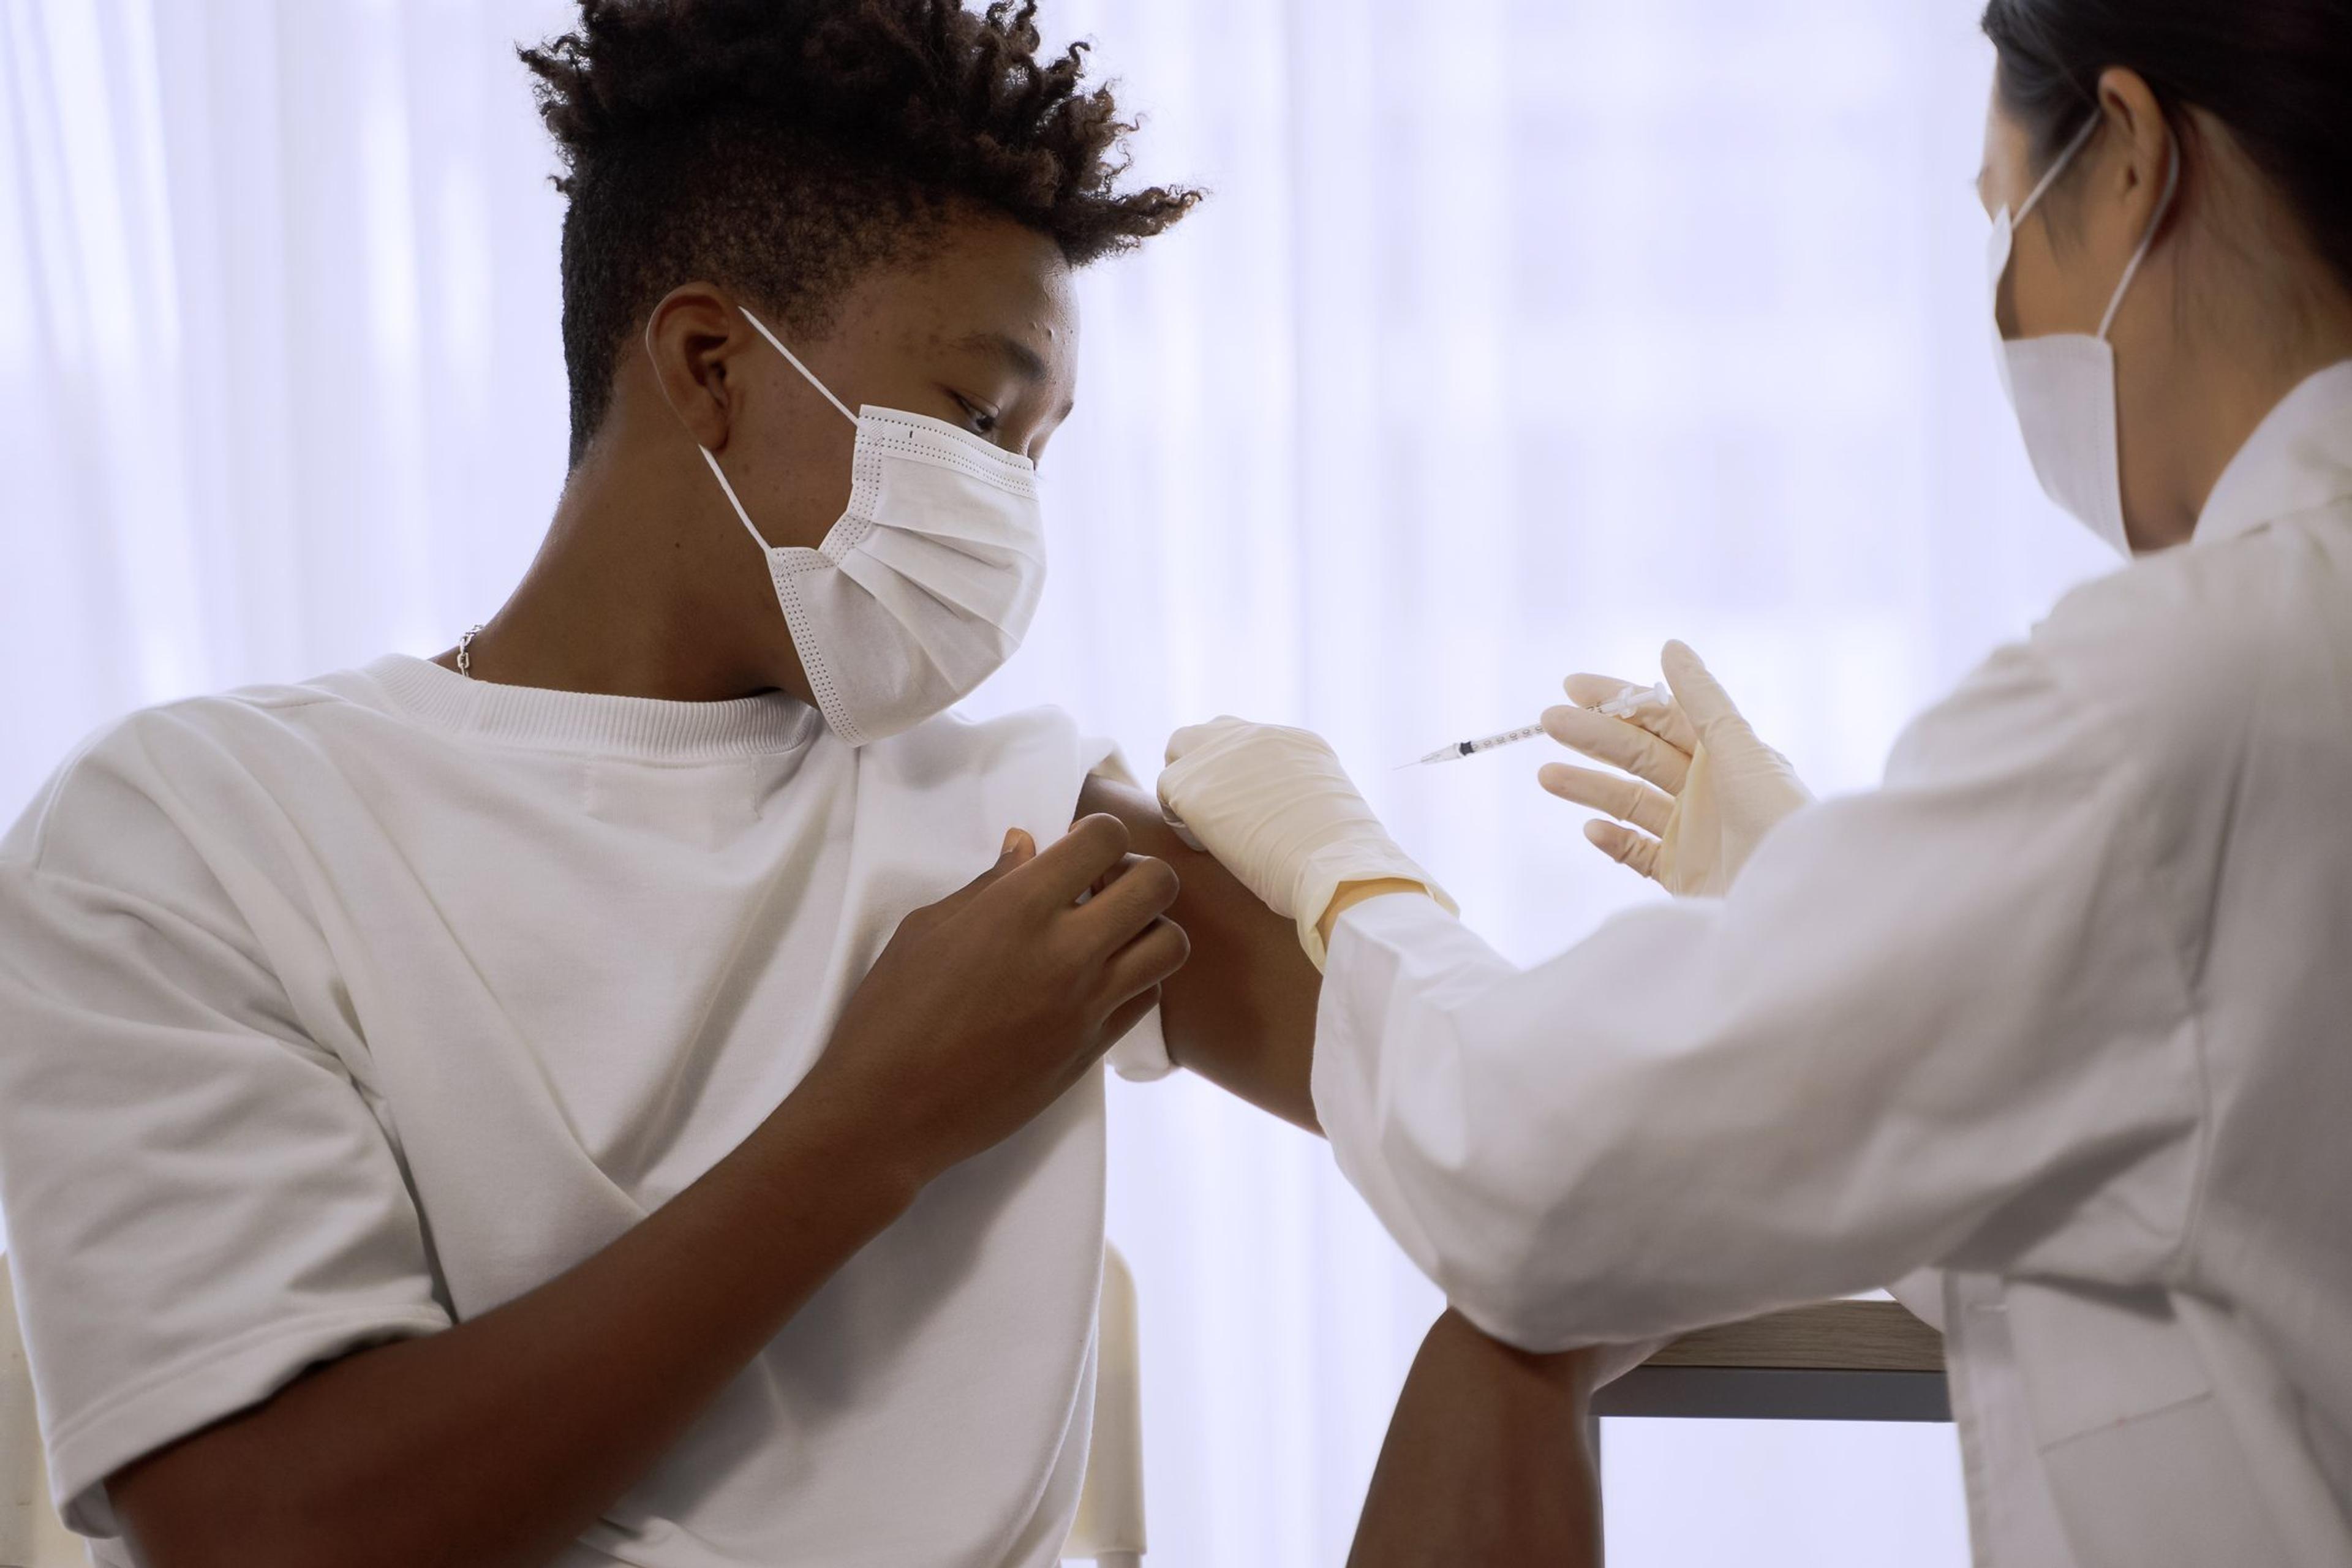 Young man receives a flu shot in his arm